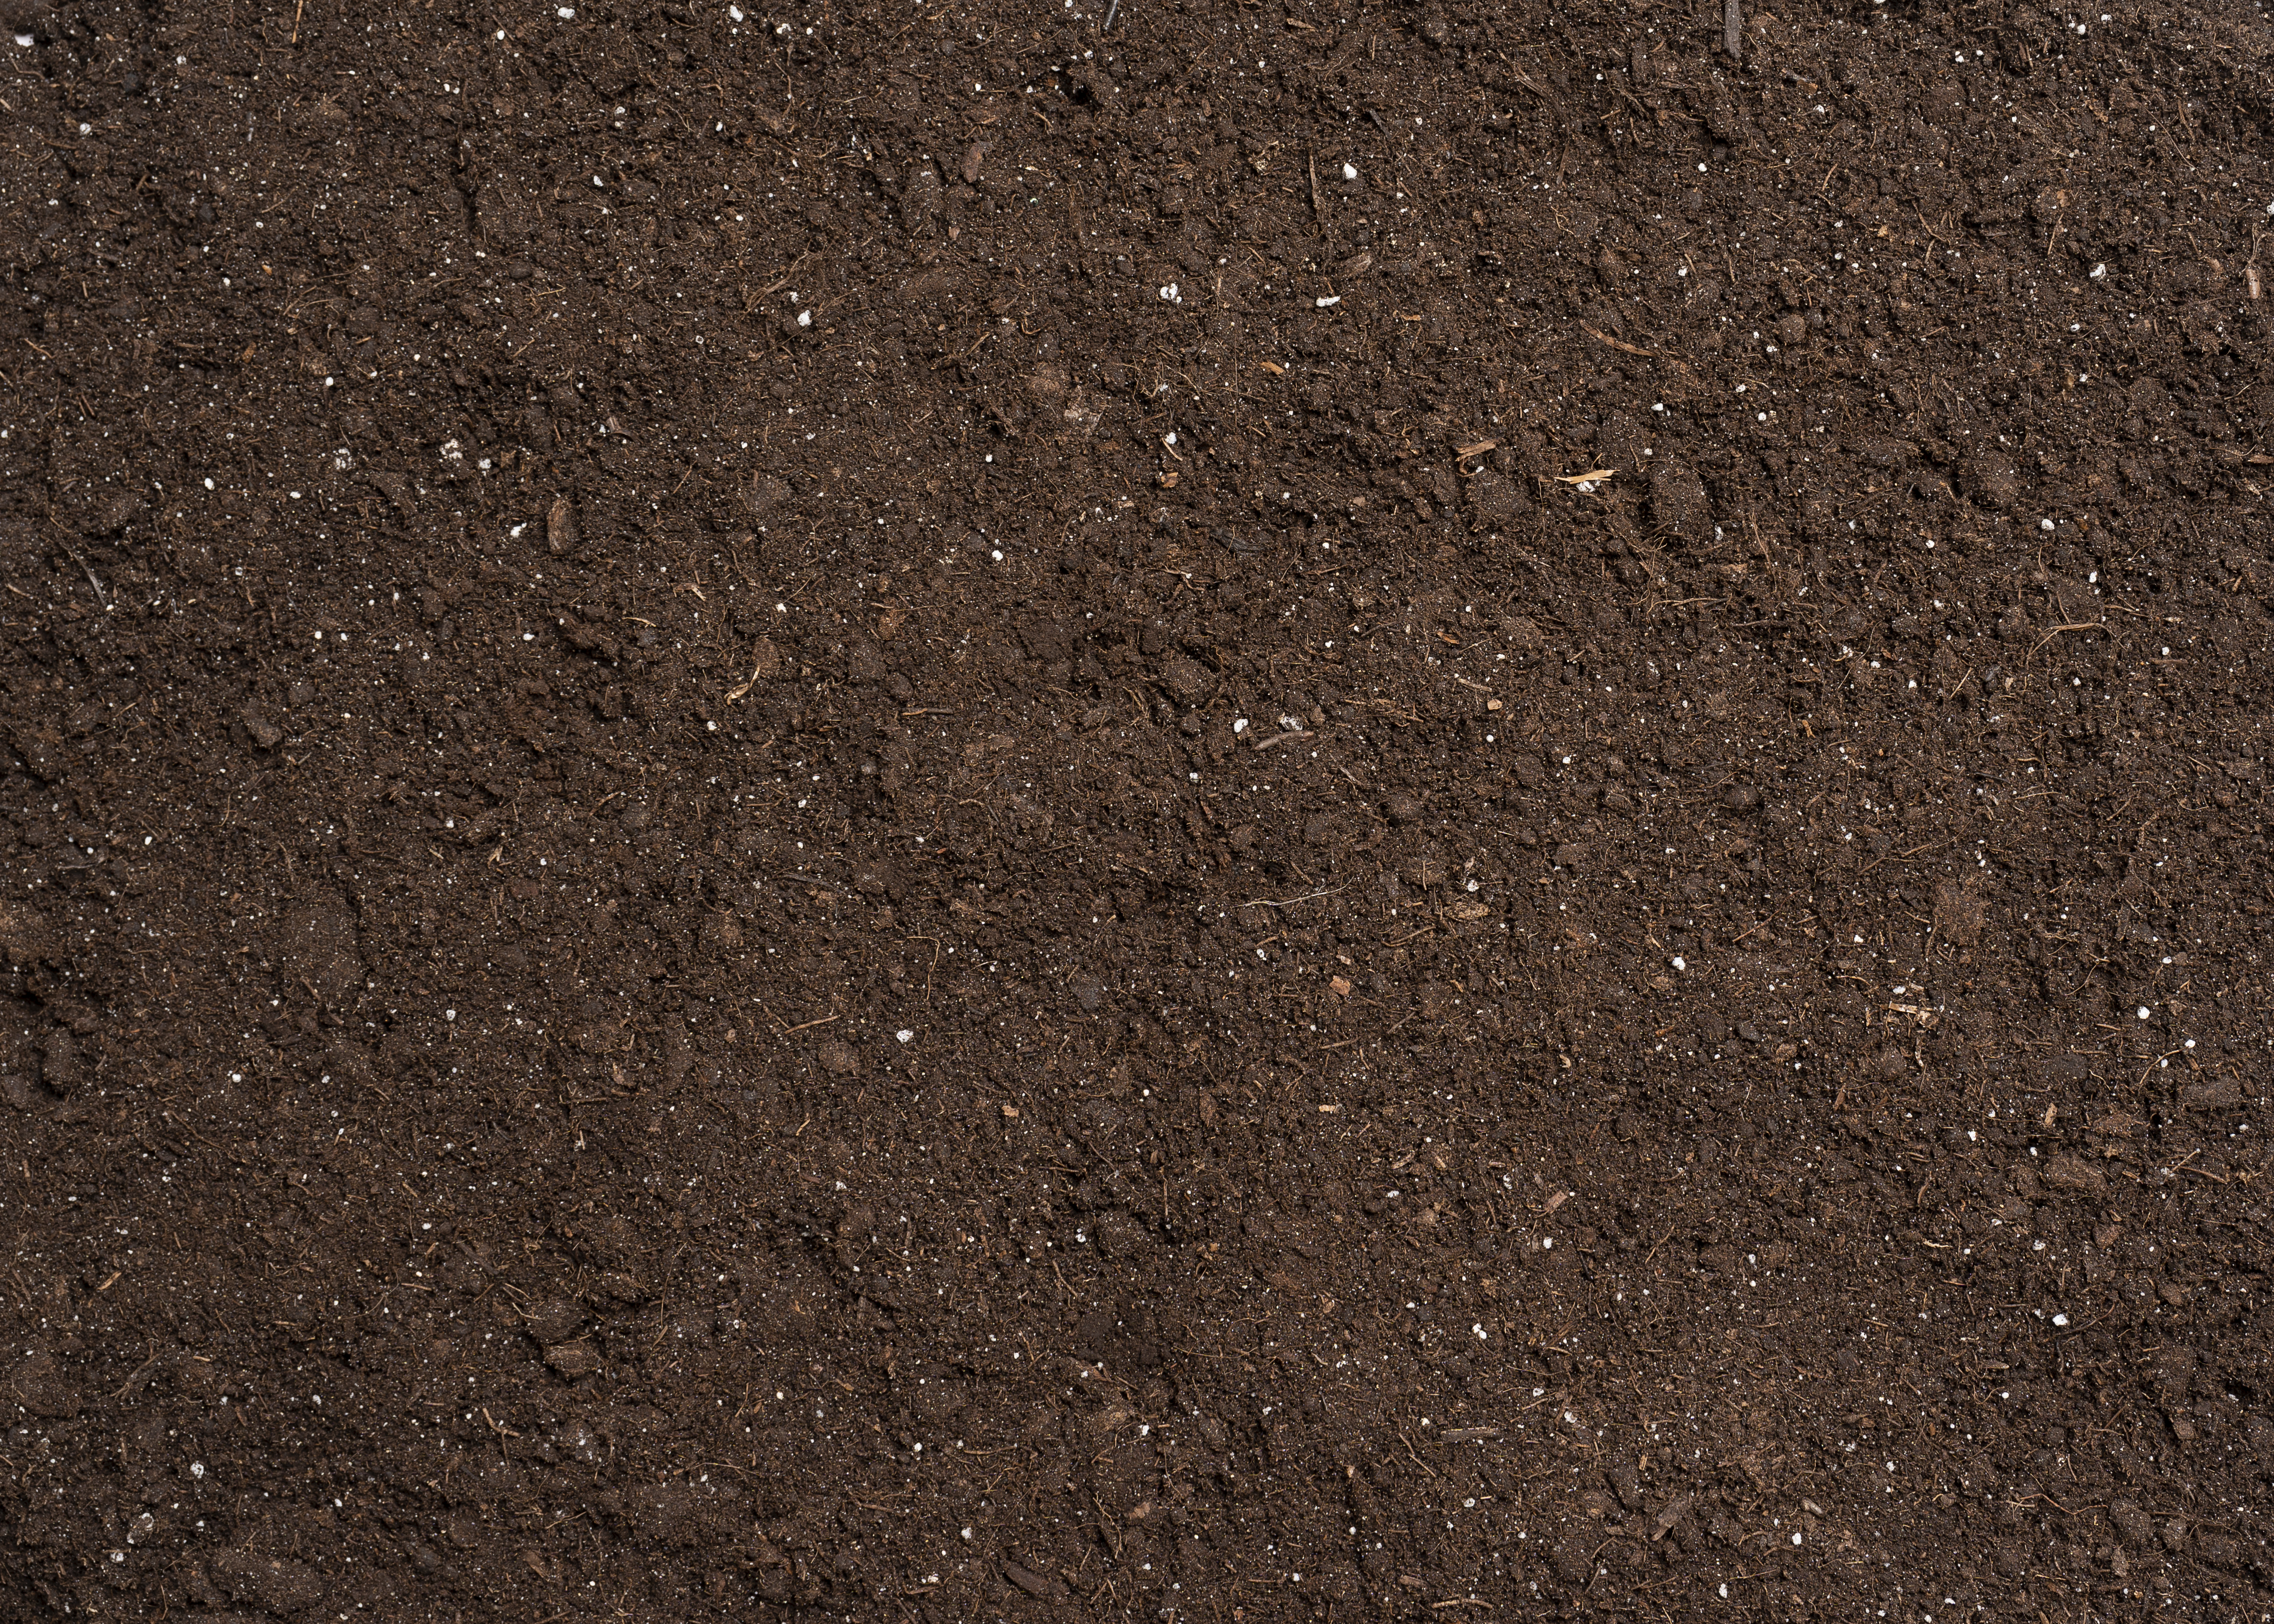 Improving soil health and carbon content